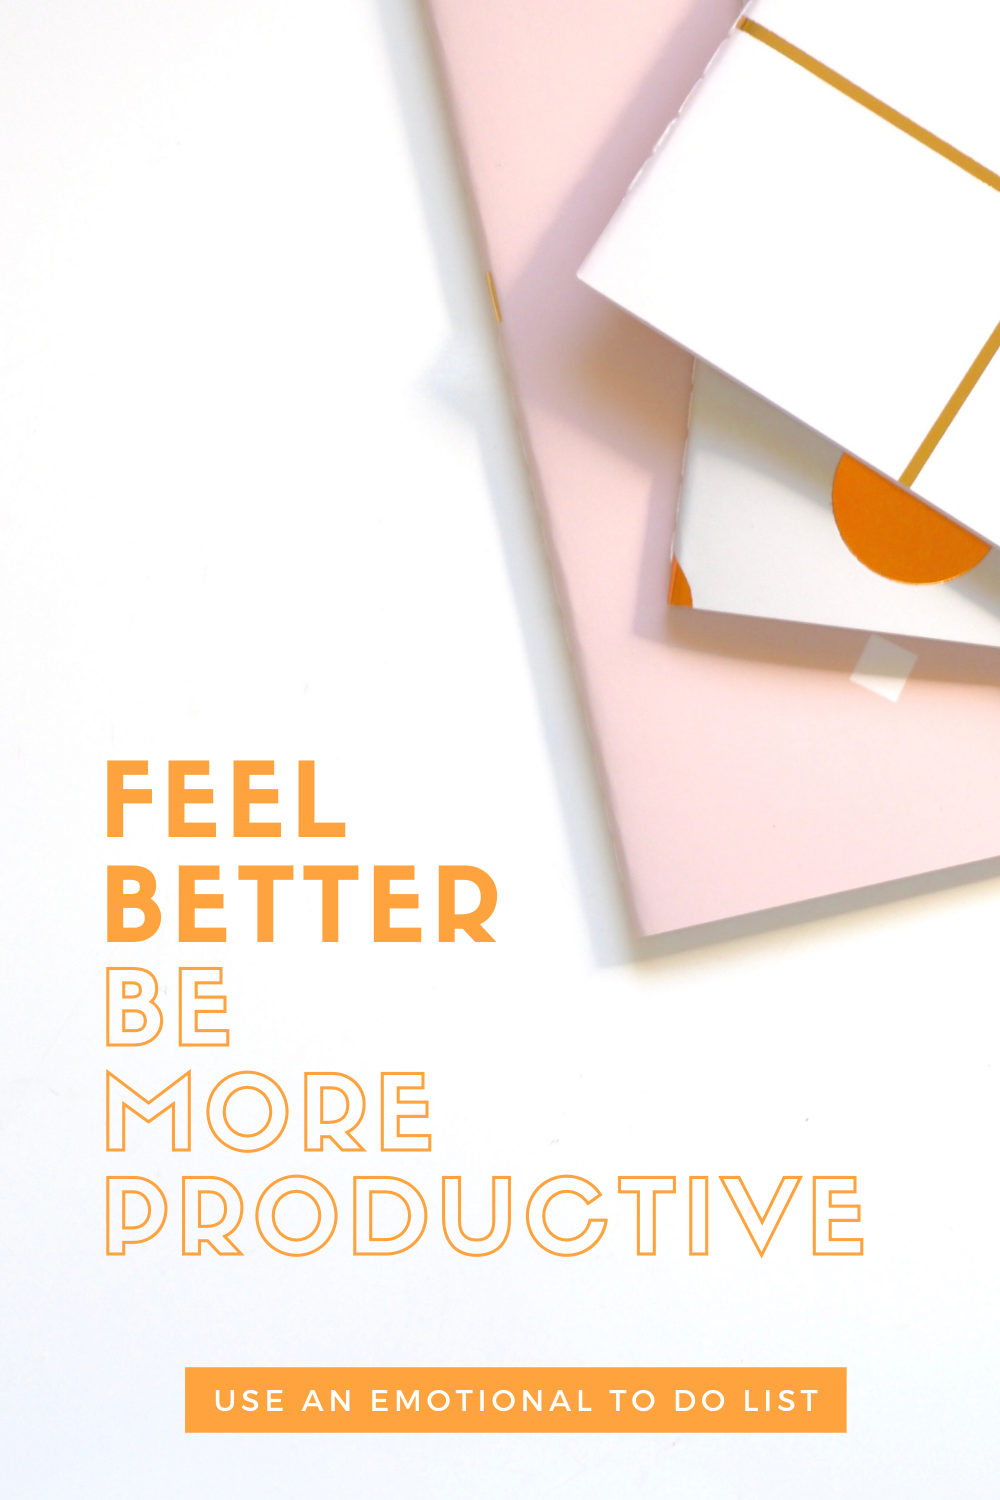 Be More Productive and Feel Better with an 'Emotional To Do List'